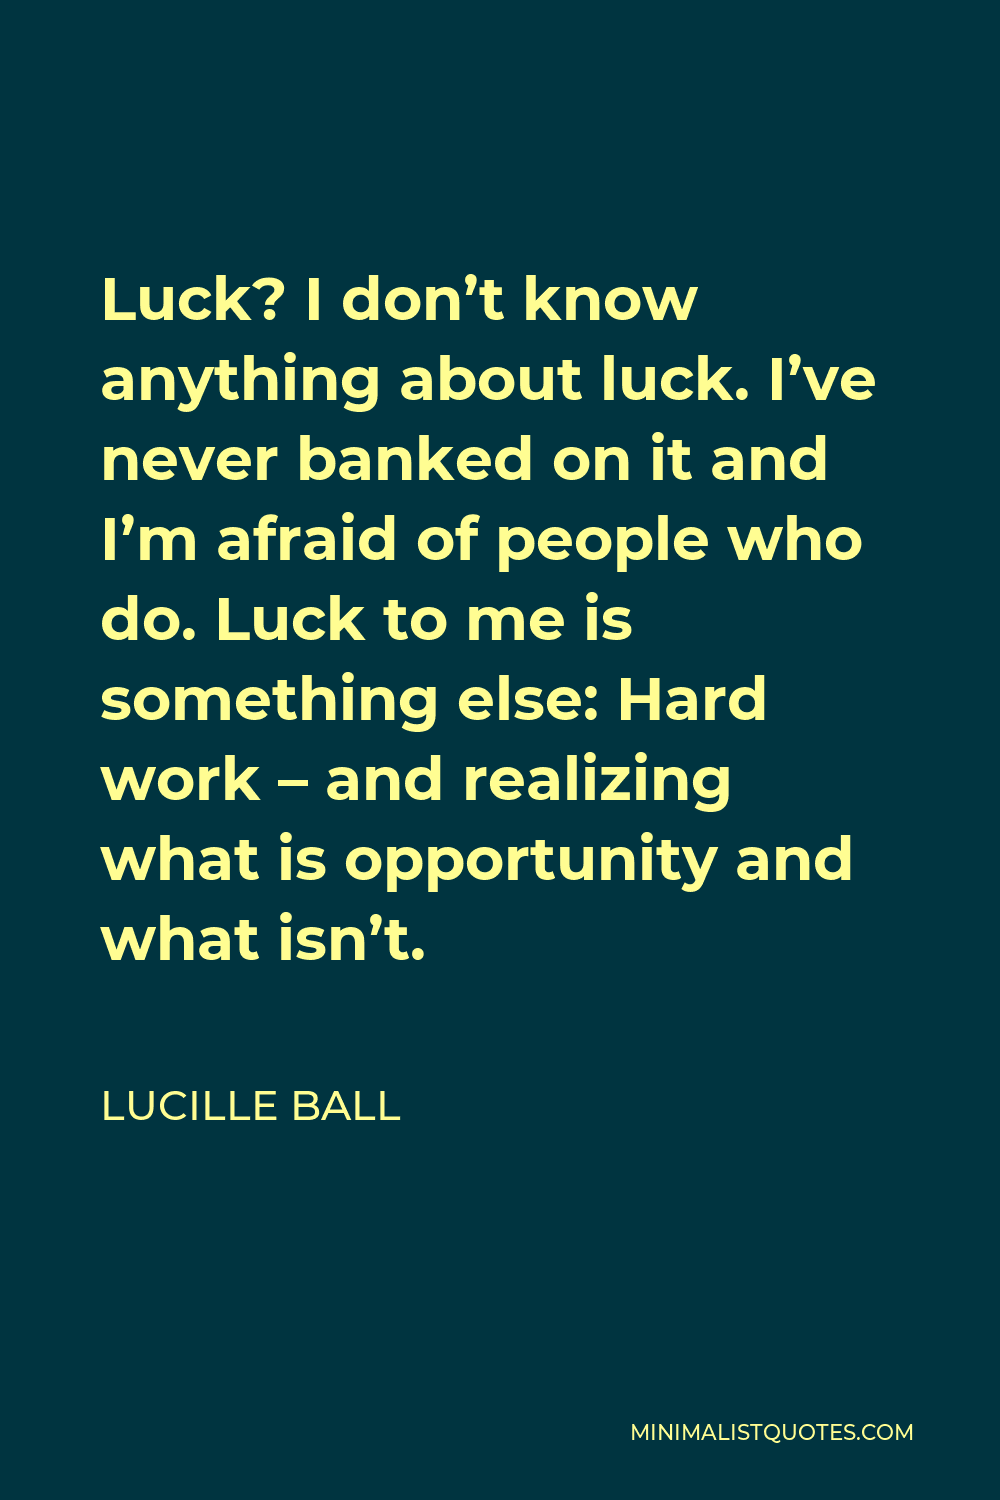 Lucille Ball Quote - Luck? I don’t know anything about luck. I’ve never banked on it and I’m afraid of people who do. Luck to me is something else: Hard work – and realizing what is opportunity and what isn’t.